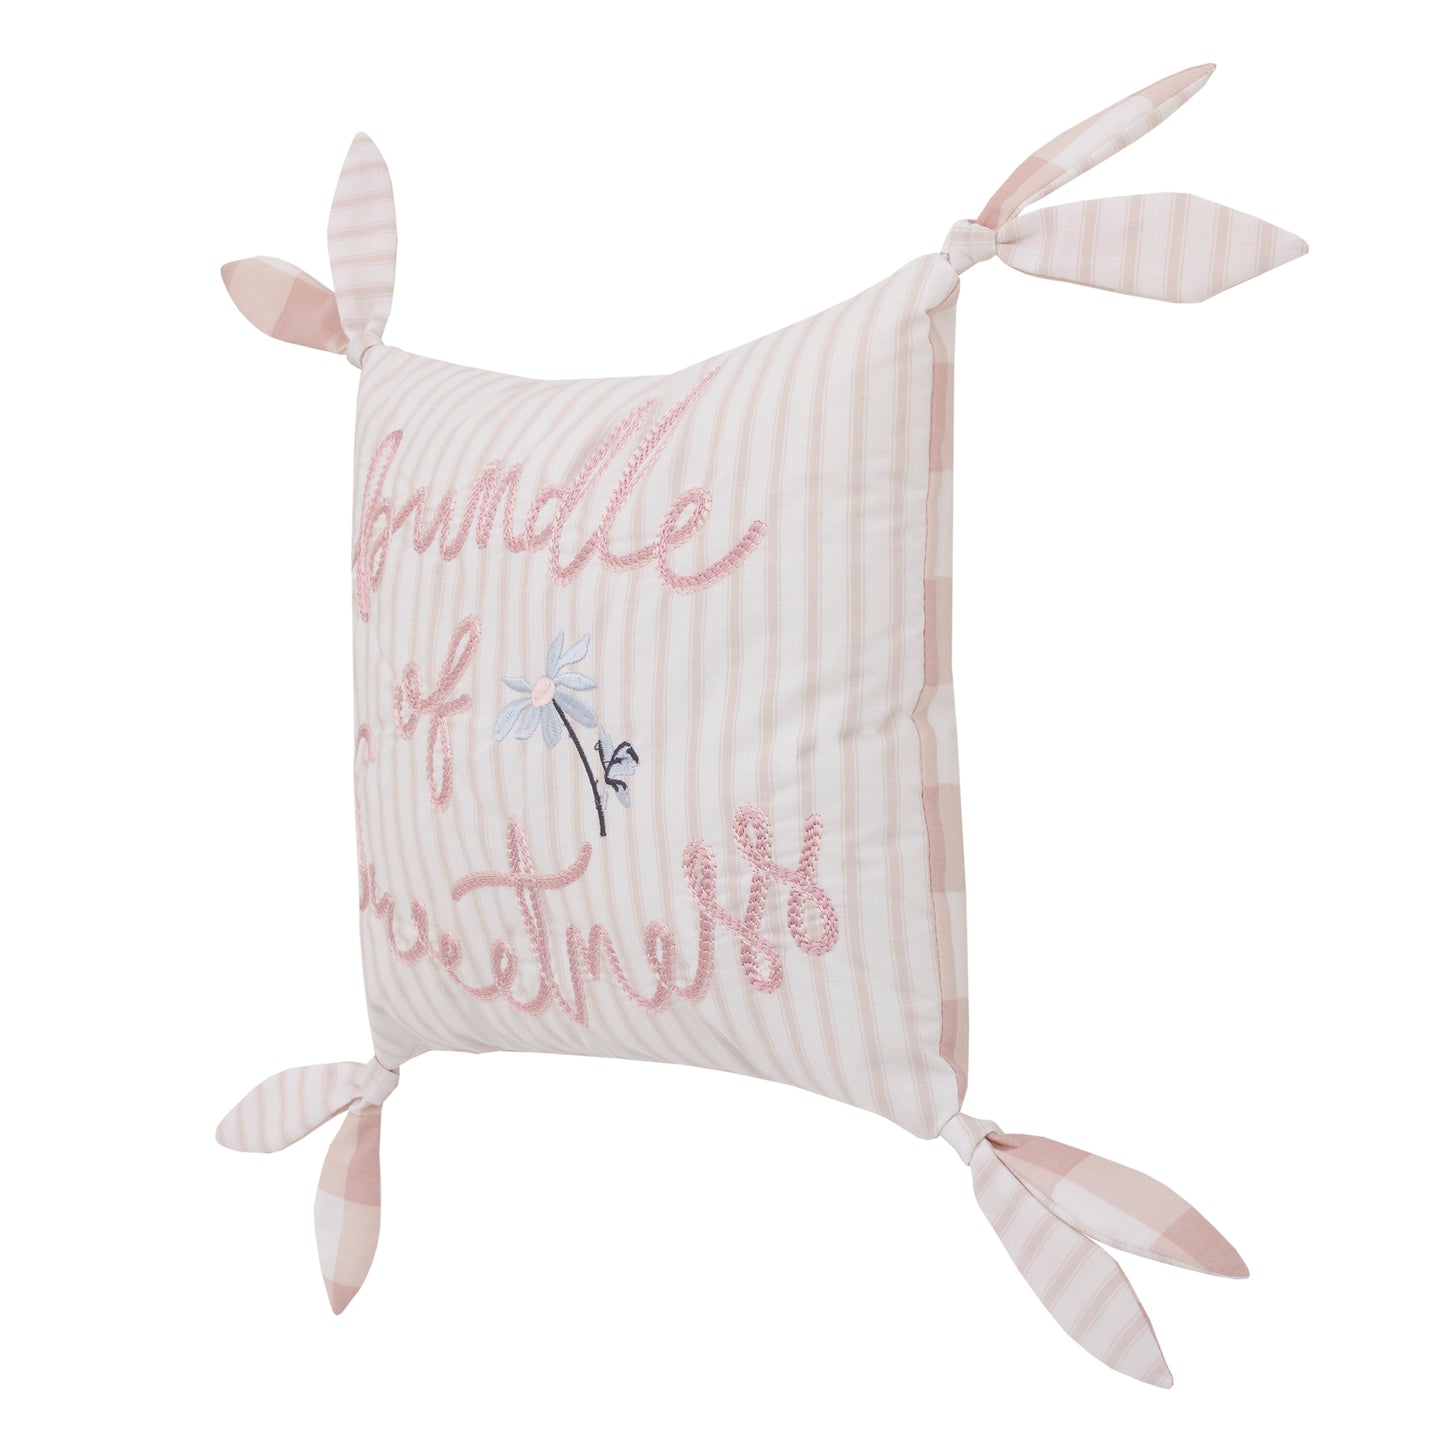 NoJo Farmhouse Chic Pink and White Stripe "Bundle of Sweetness" Decorative Throw Pillow with Knotted Ties